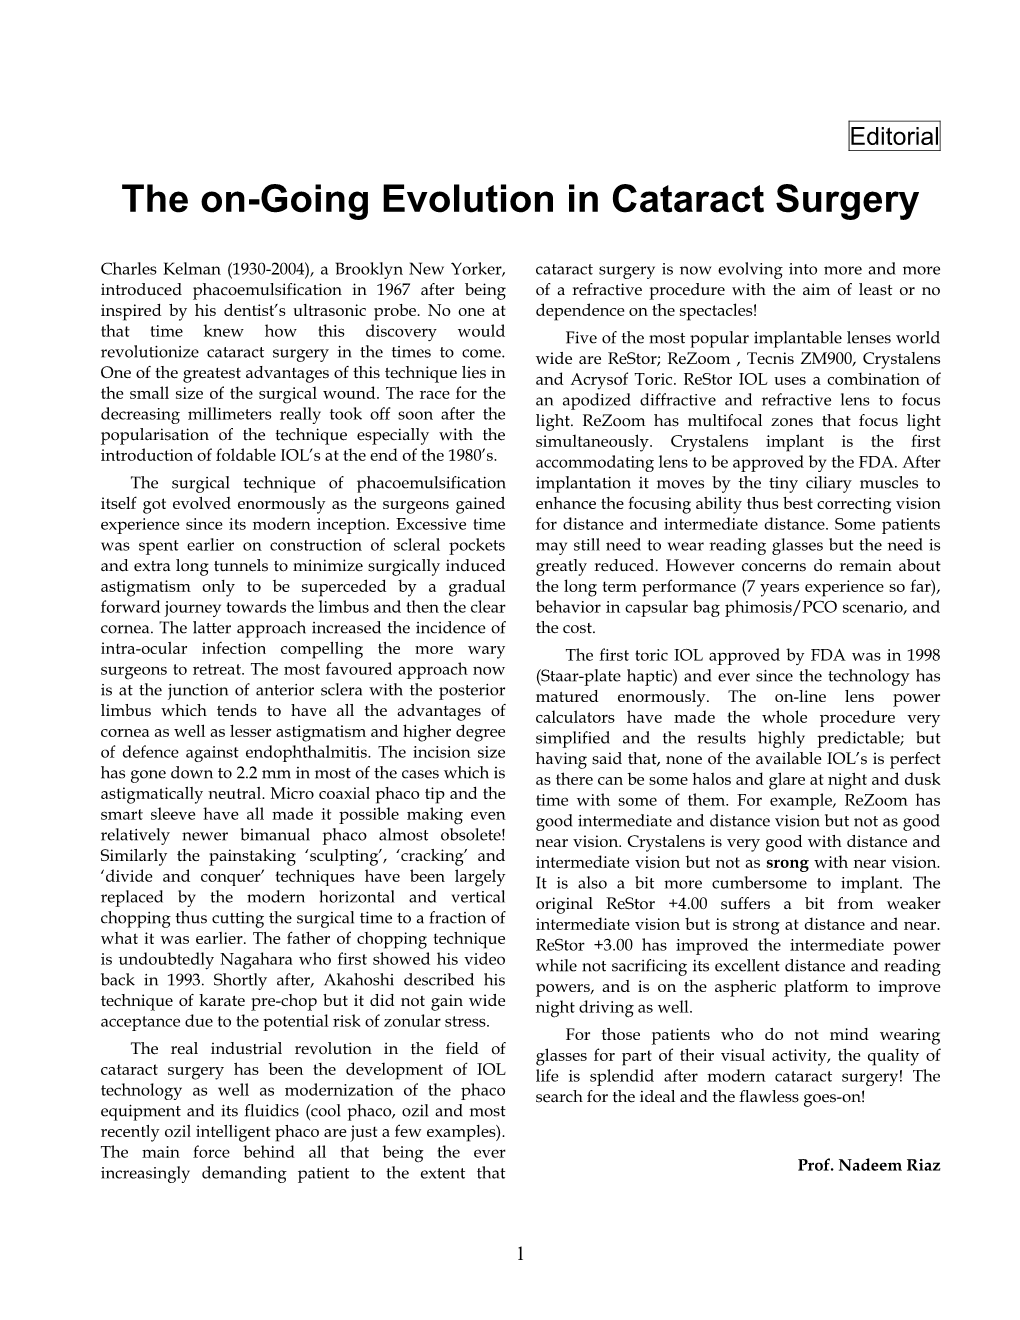 The On-Going Evolution in Cataract Surgery